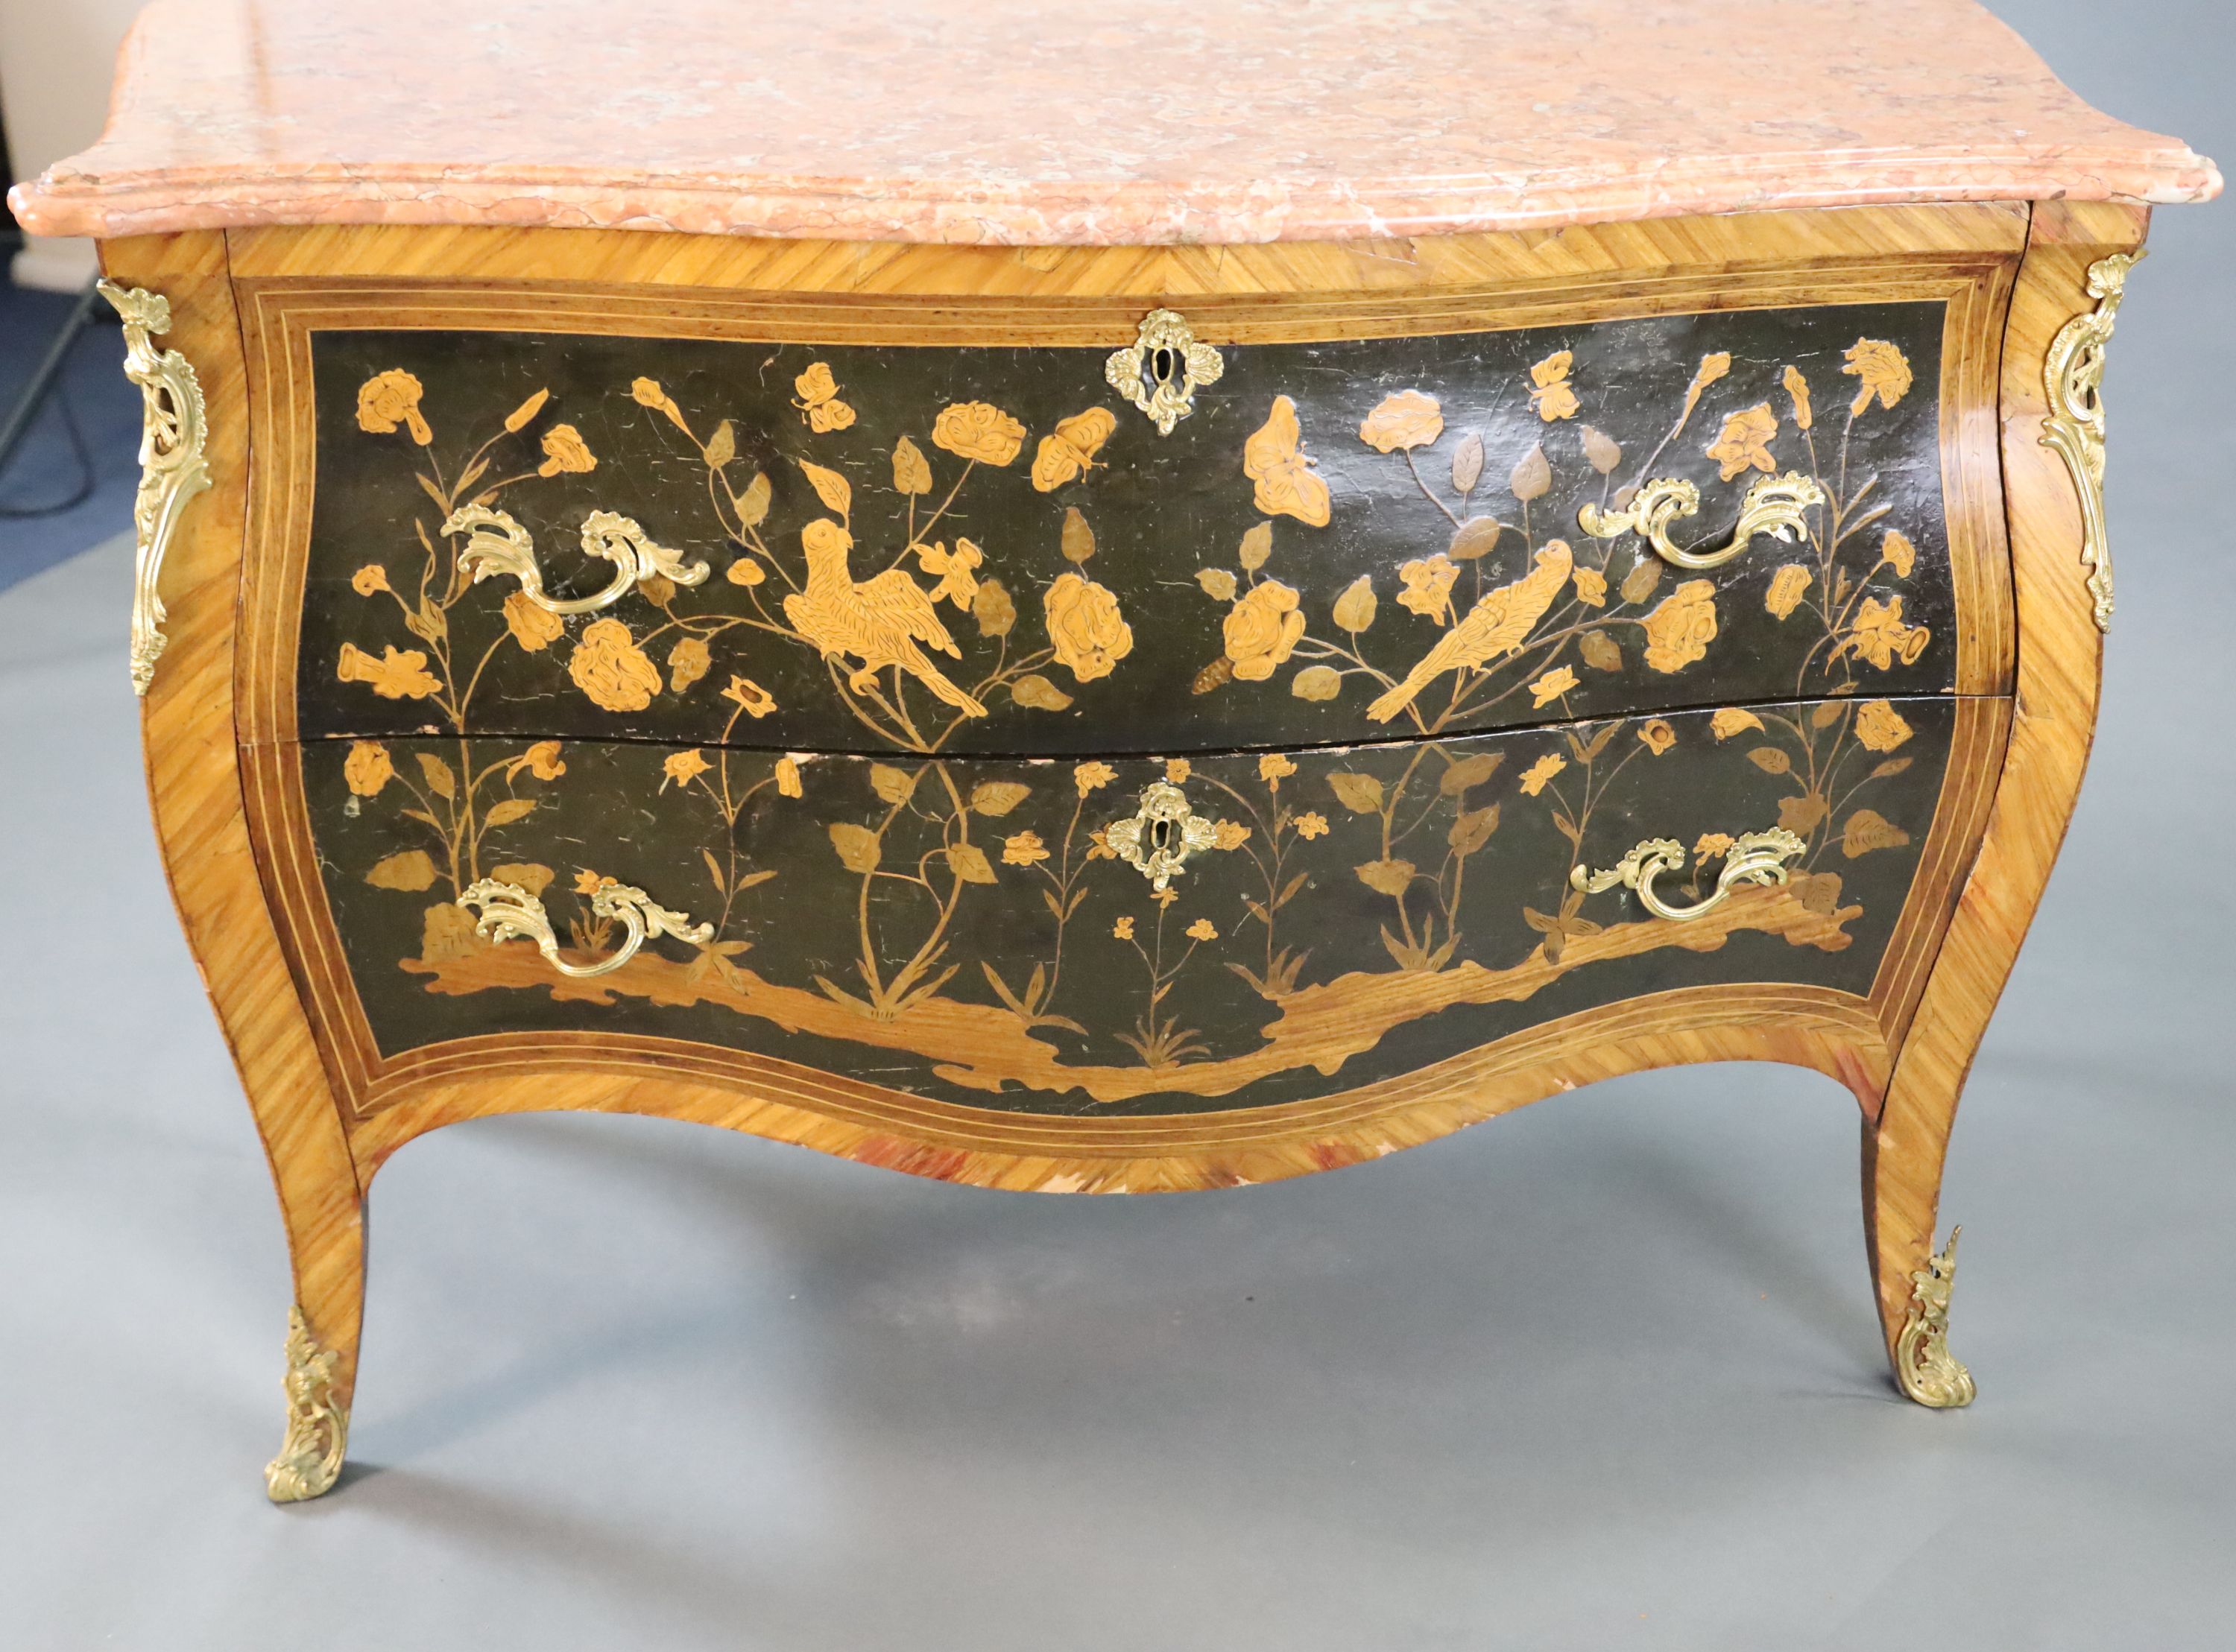 A French Louis XV style kingwood and ormolu mounted serpentine bombe commode, W.4ft D.2ft H.2ft 11in.